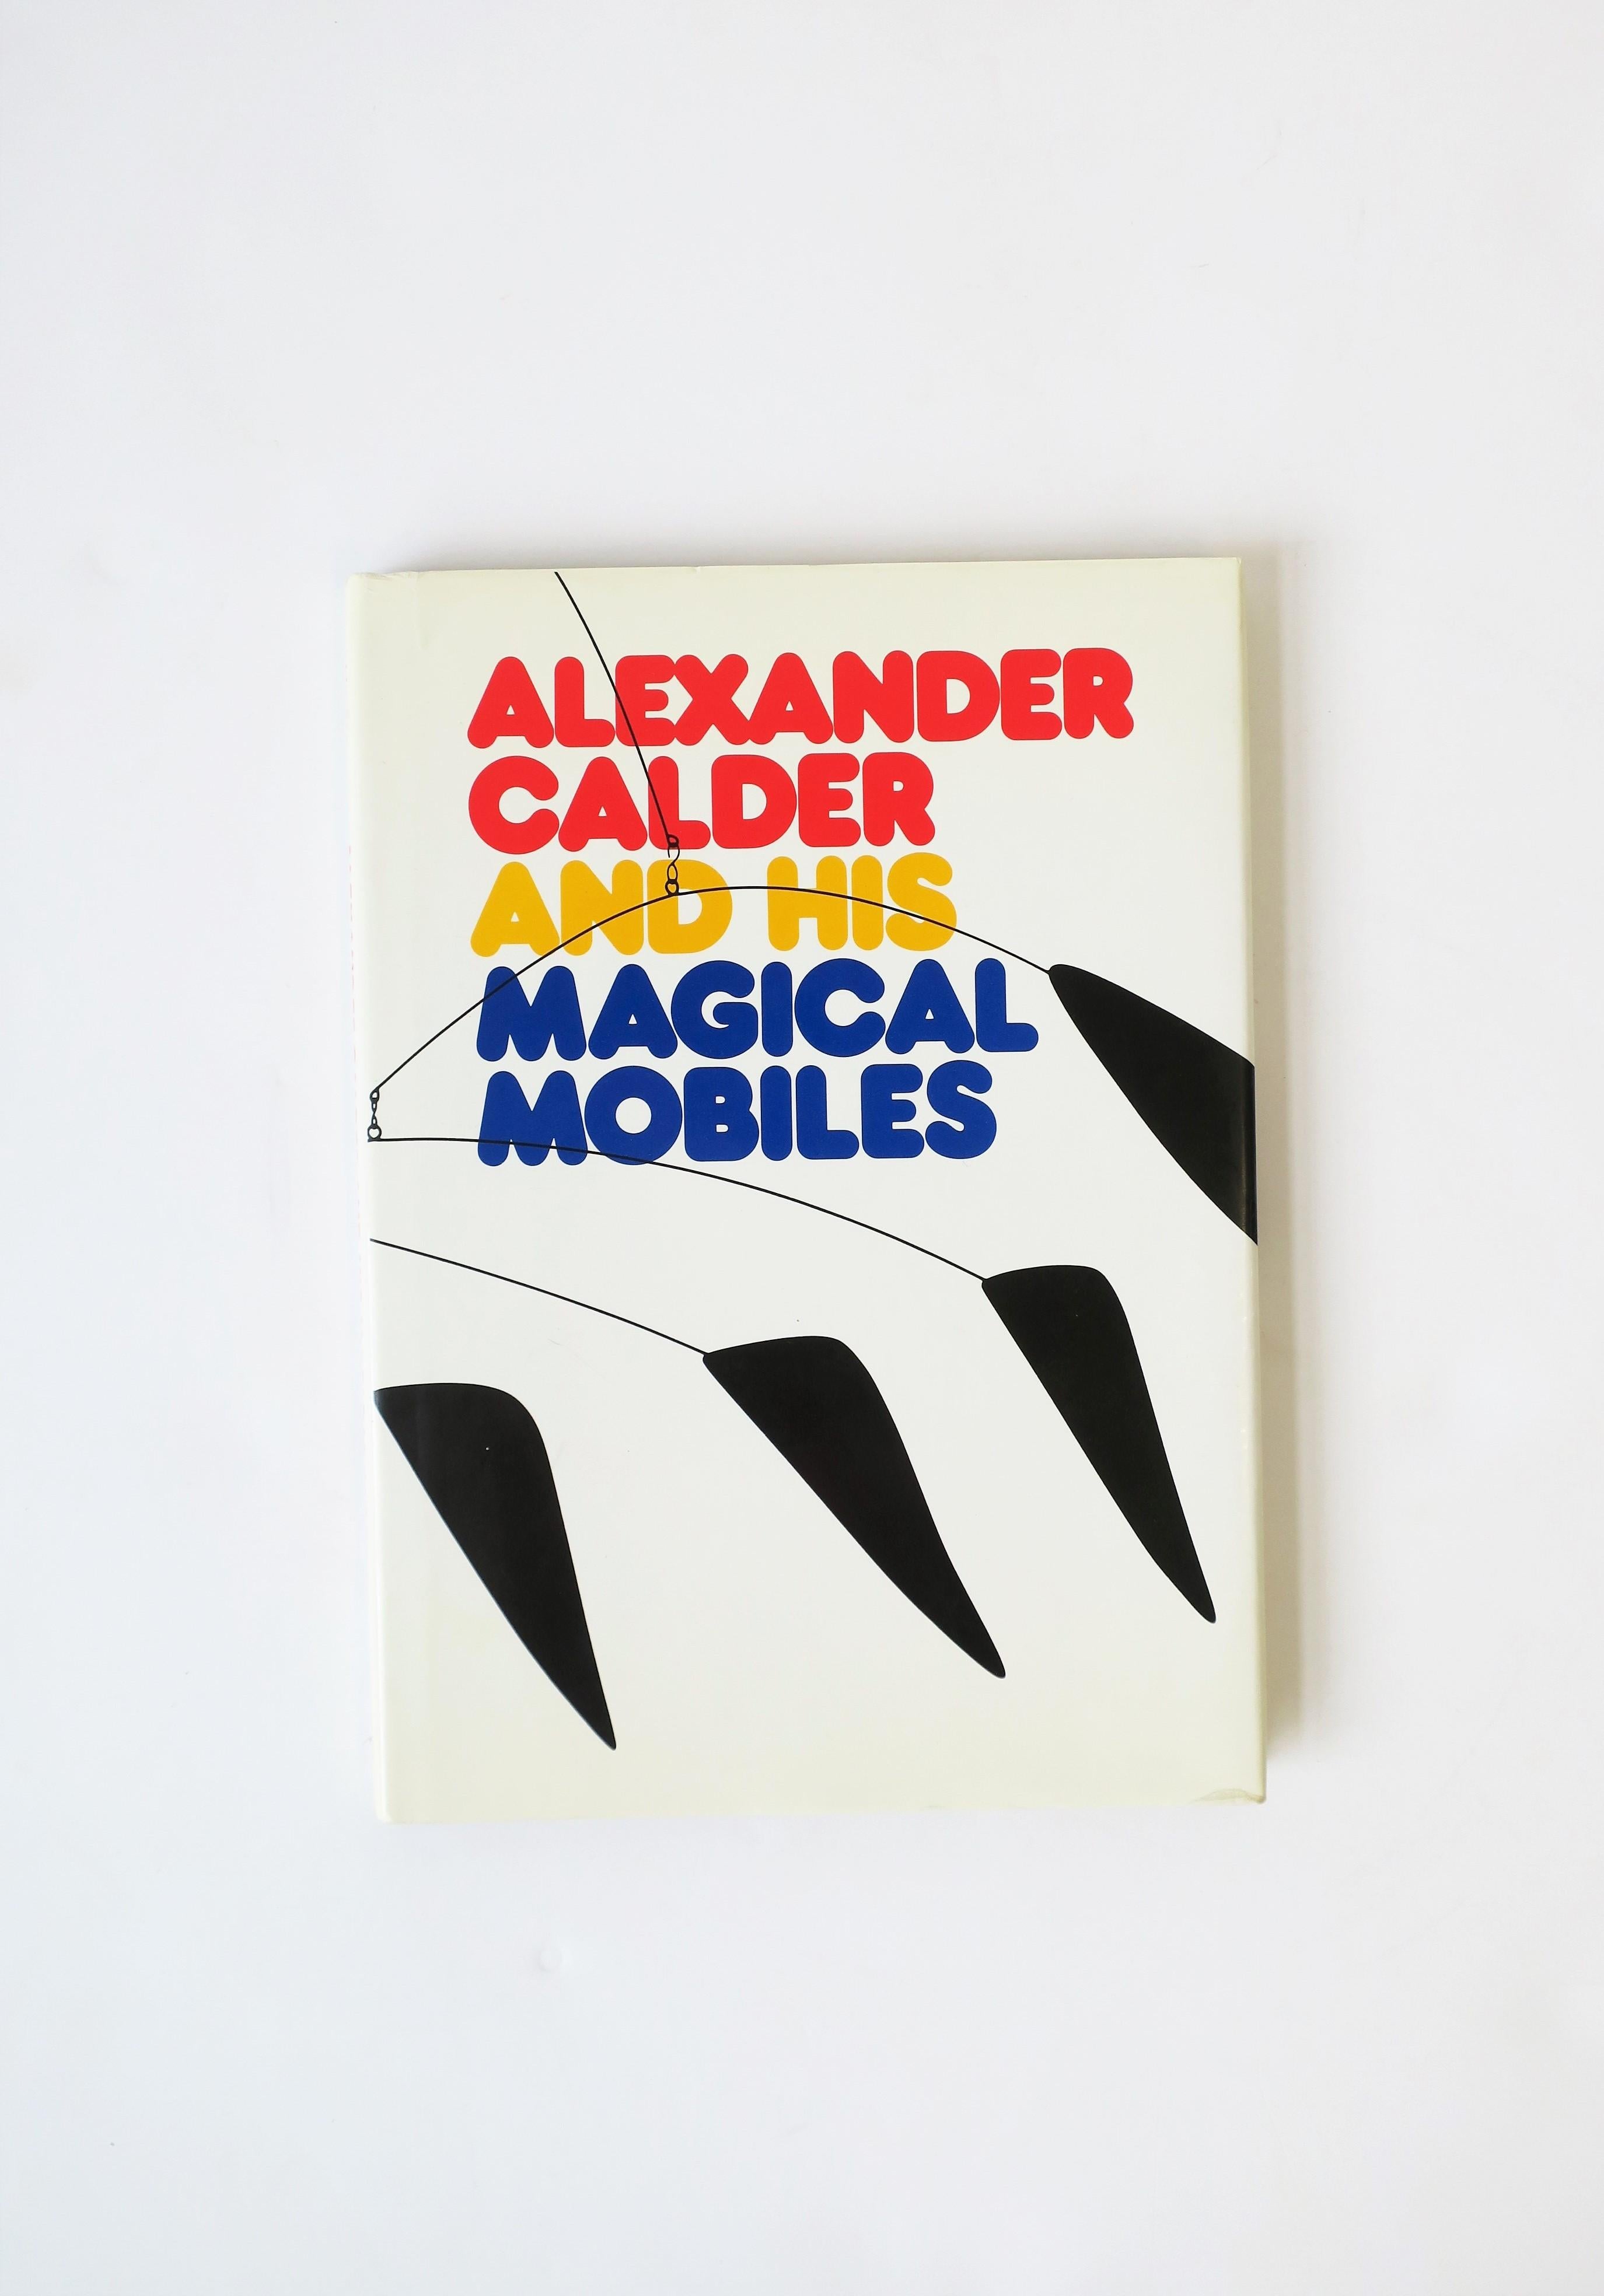 A great book about sculptor Alexander Calder and his artistic achievements; 